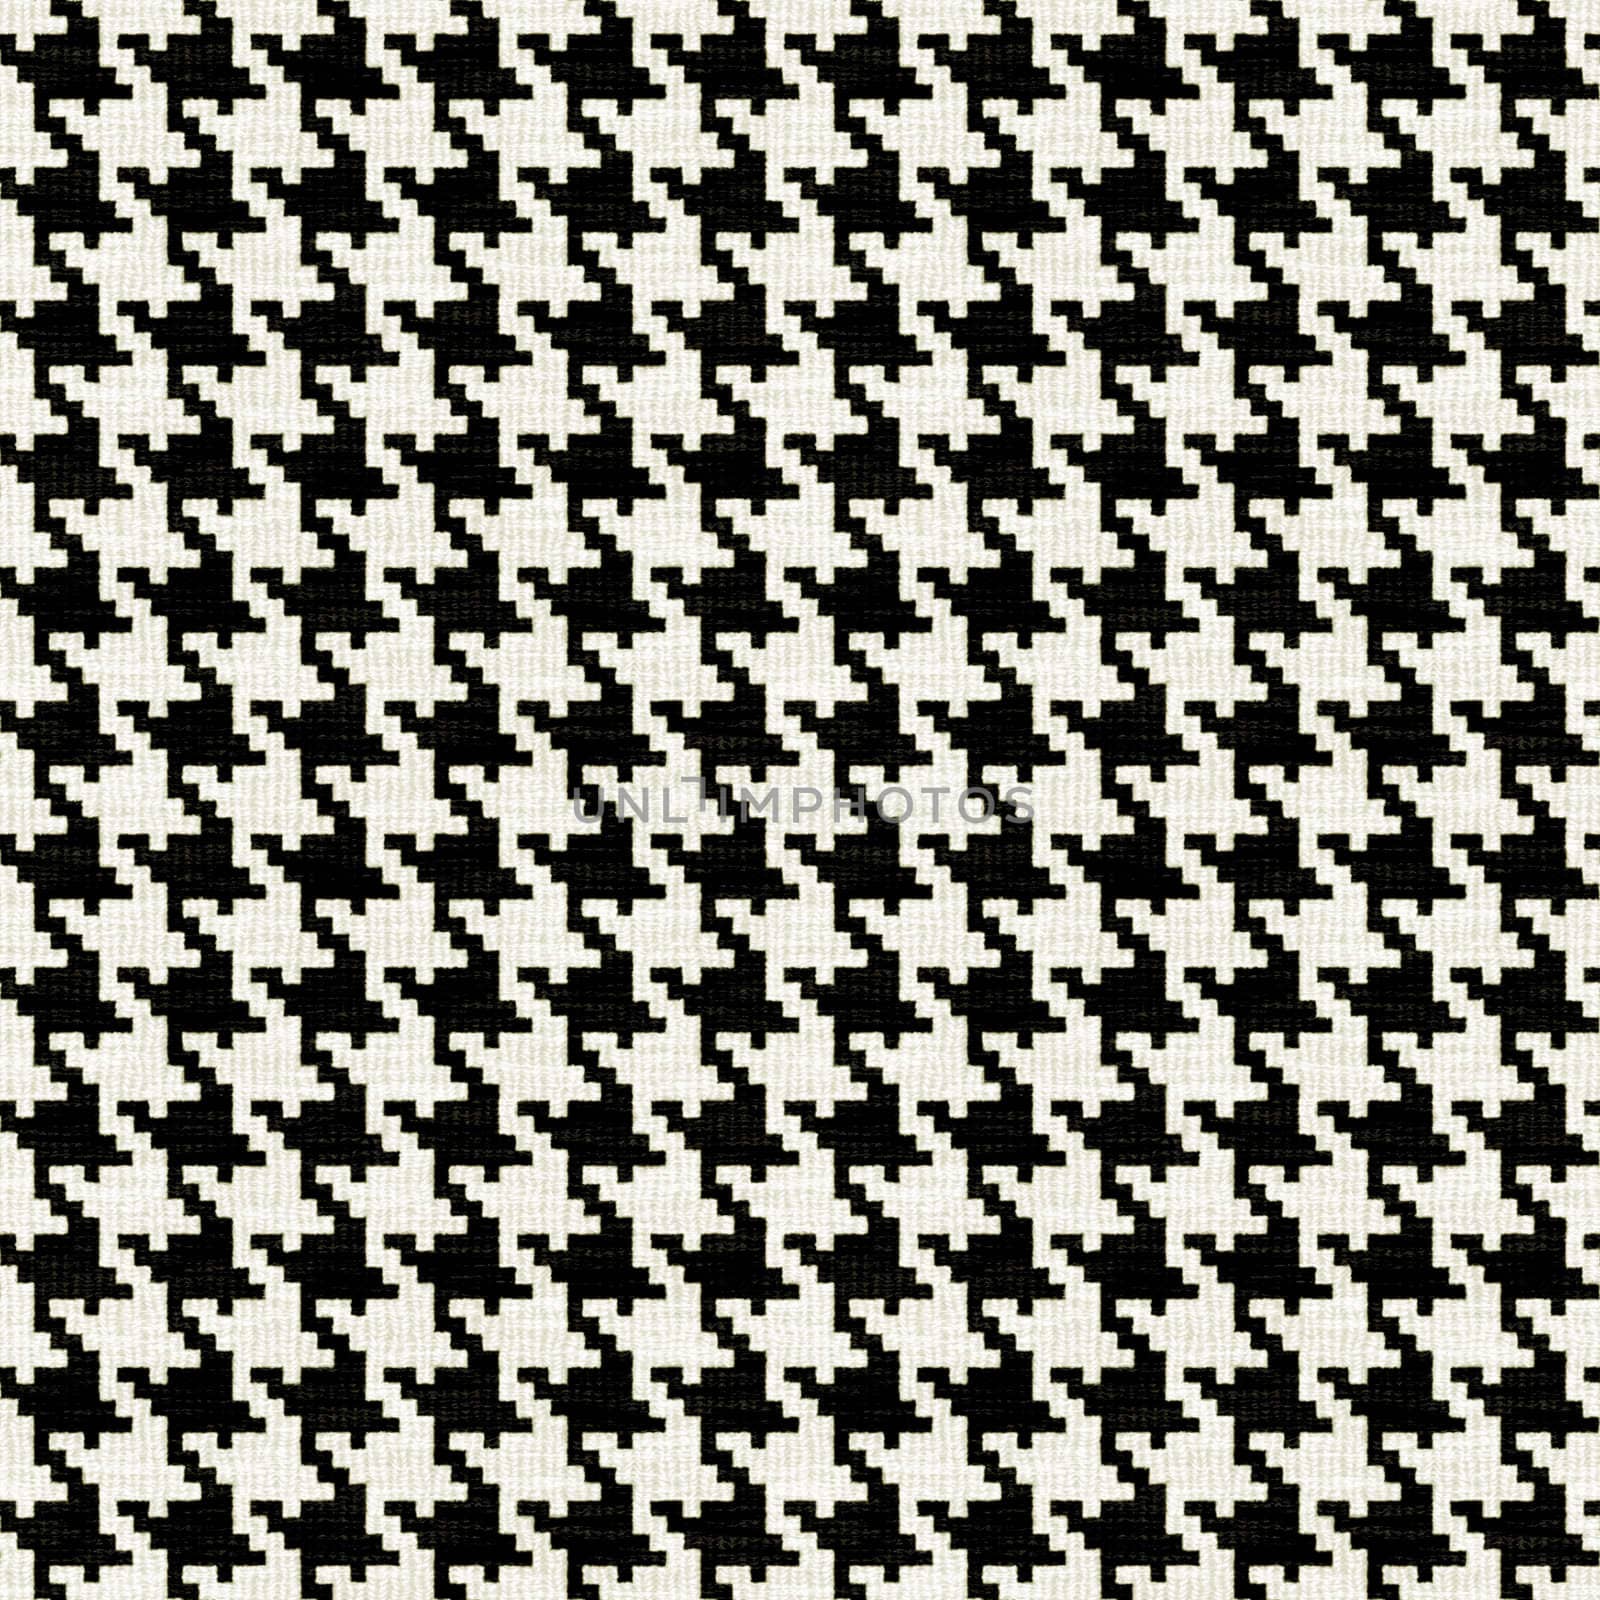 Hounds Tooth Pattern by graficallyminded